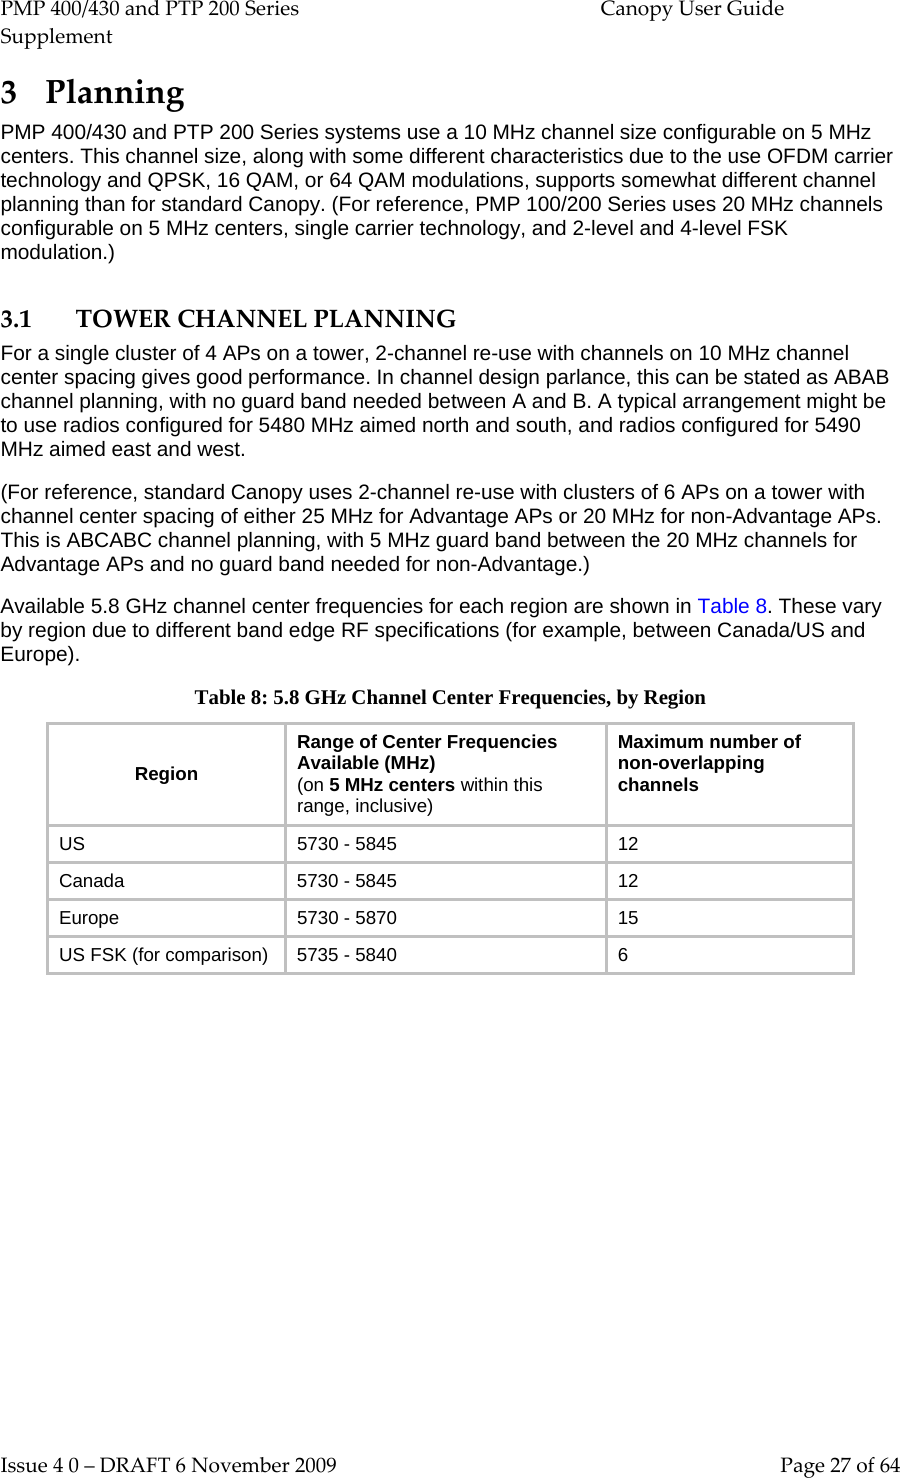 PMP 400/430 and PTP 200 Series  Canopy User Guide Supplement Issue 4 0 – DRAFT 6 November 2009    Page 27 of 64 3 Planning PMP 400/430 and PTP 200 Series systems use a 10 MHz channel size configurable on 5 MHz centers. This channel size, along with some different characteristics due to the use OFDM carrier technology and QPSK, 16 QAM, or 64 QAM modulations, supports somewhat different channel planning than for standard Canopy. (For reference, PMP 100/200 Series uses 20 MHz channels configurable on 5 MHz centers, single carrier technology, and 2-level and 4-level FSK modulation.) 3.1 TOWER CHANNEL PLANNING For a single cluster of 4 APs on a tower, 2-channel re-use with channels on 10 MHz channel center spacing gives good performance. In channel design parlance, this can be stated as ABAB channel planning, with no guard band needed between A and B. A typical arrangement might be to use radios configured for 5480 MHz aimed north and south, and radios configured for 5490 MHz aimed east and west. (For reference, standard Canopy uses 2-channel re-use with clusters of 6 APs on a tower with channel center spacing of either 25 MHz for Advantage APs or 20 MHz for non-Advantage APs. This is ABCABC channel planning, with 5 MHz guard band between the 20 MHz channels for Advantage APs and no guard band needed for non-Advantage.) Available 5.8 GHz channel center frequencies for each region are shown in Table 8. These vary by region due to different band edge RF specifications (for example, between Canada/US and Europe). Table 8: 5.8 GHz Channel Center Frequencies, by Region Region Range of Center Frequencies Available (MHz) (on 5 MHz centers within this range, inclusive) Maximum number of non-overlapping channels US 5730 - 5845 12 Canada 5730 - 5845 12 Europe 5730 - 5870 15 US FSK (for comparison) 5735 - 5840  6           